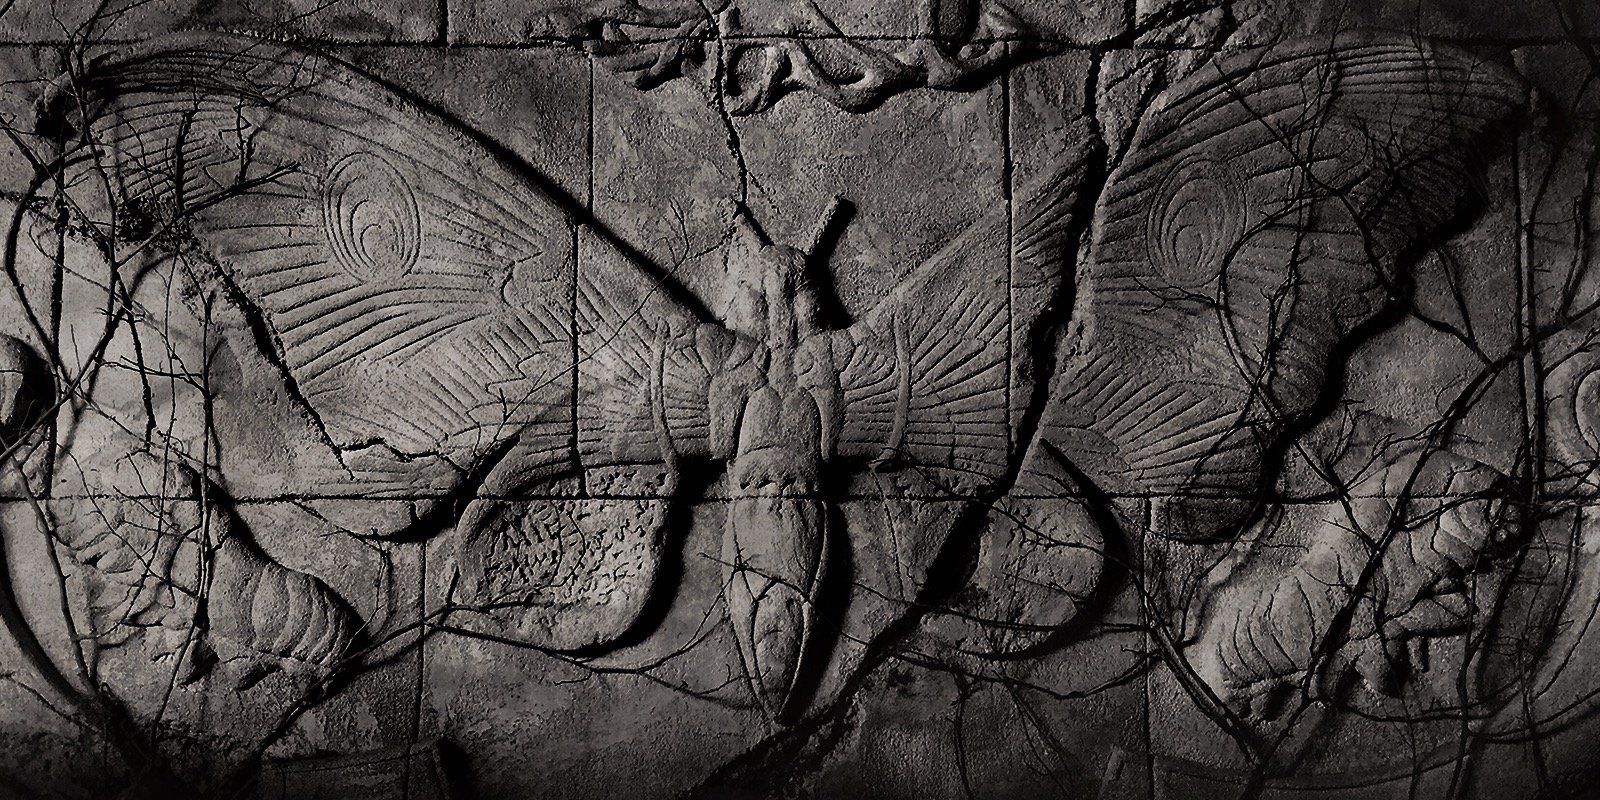 The carving of Mothra in Godzilla King of the Monsters